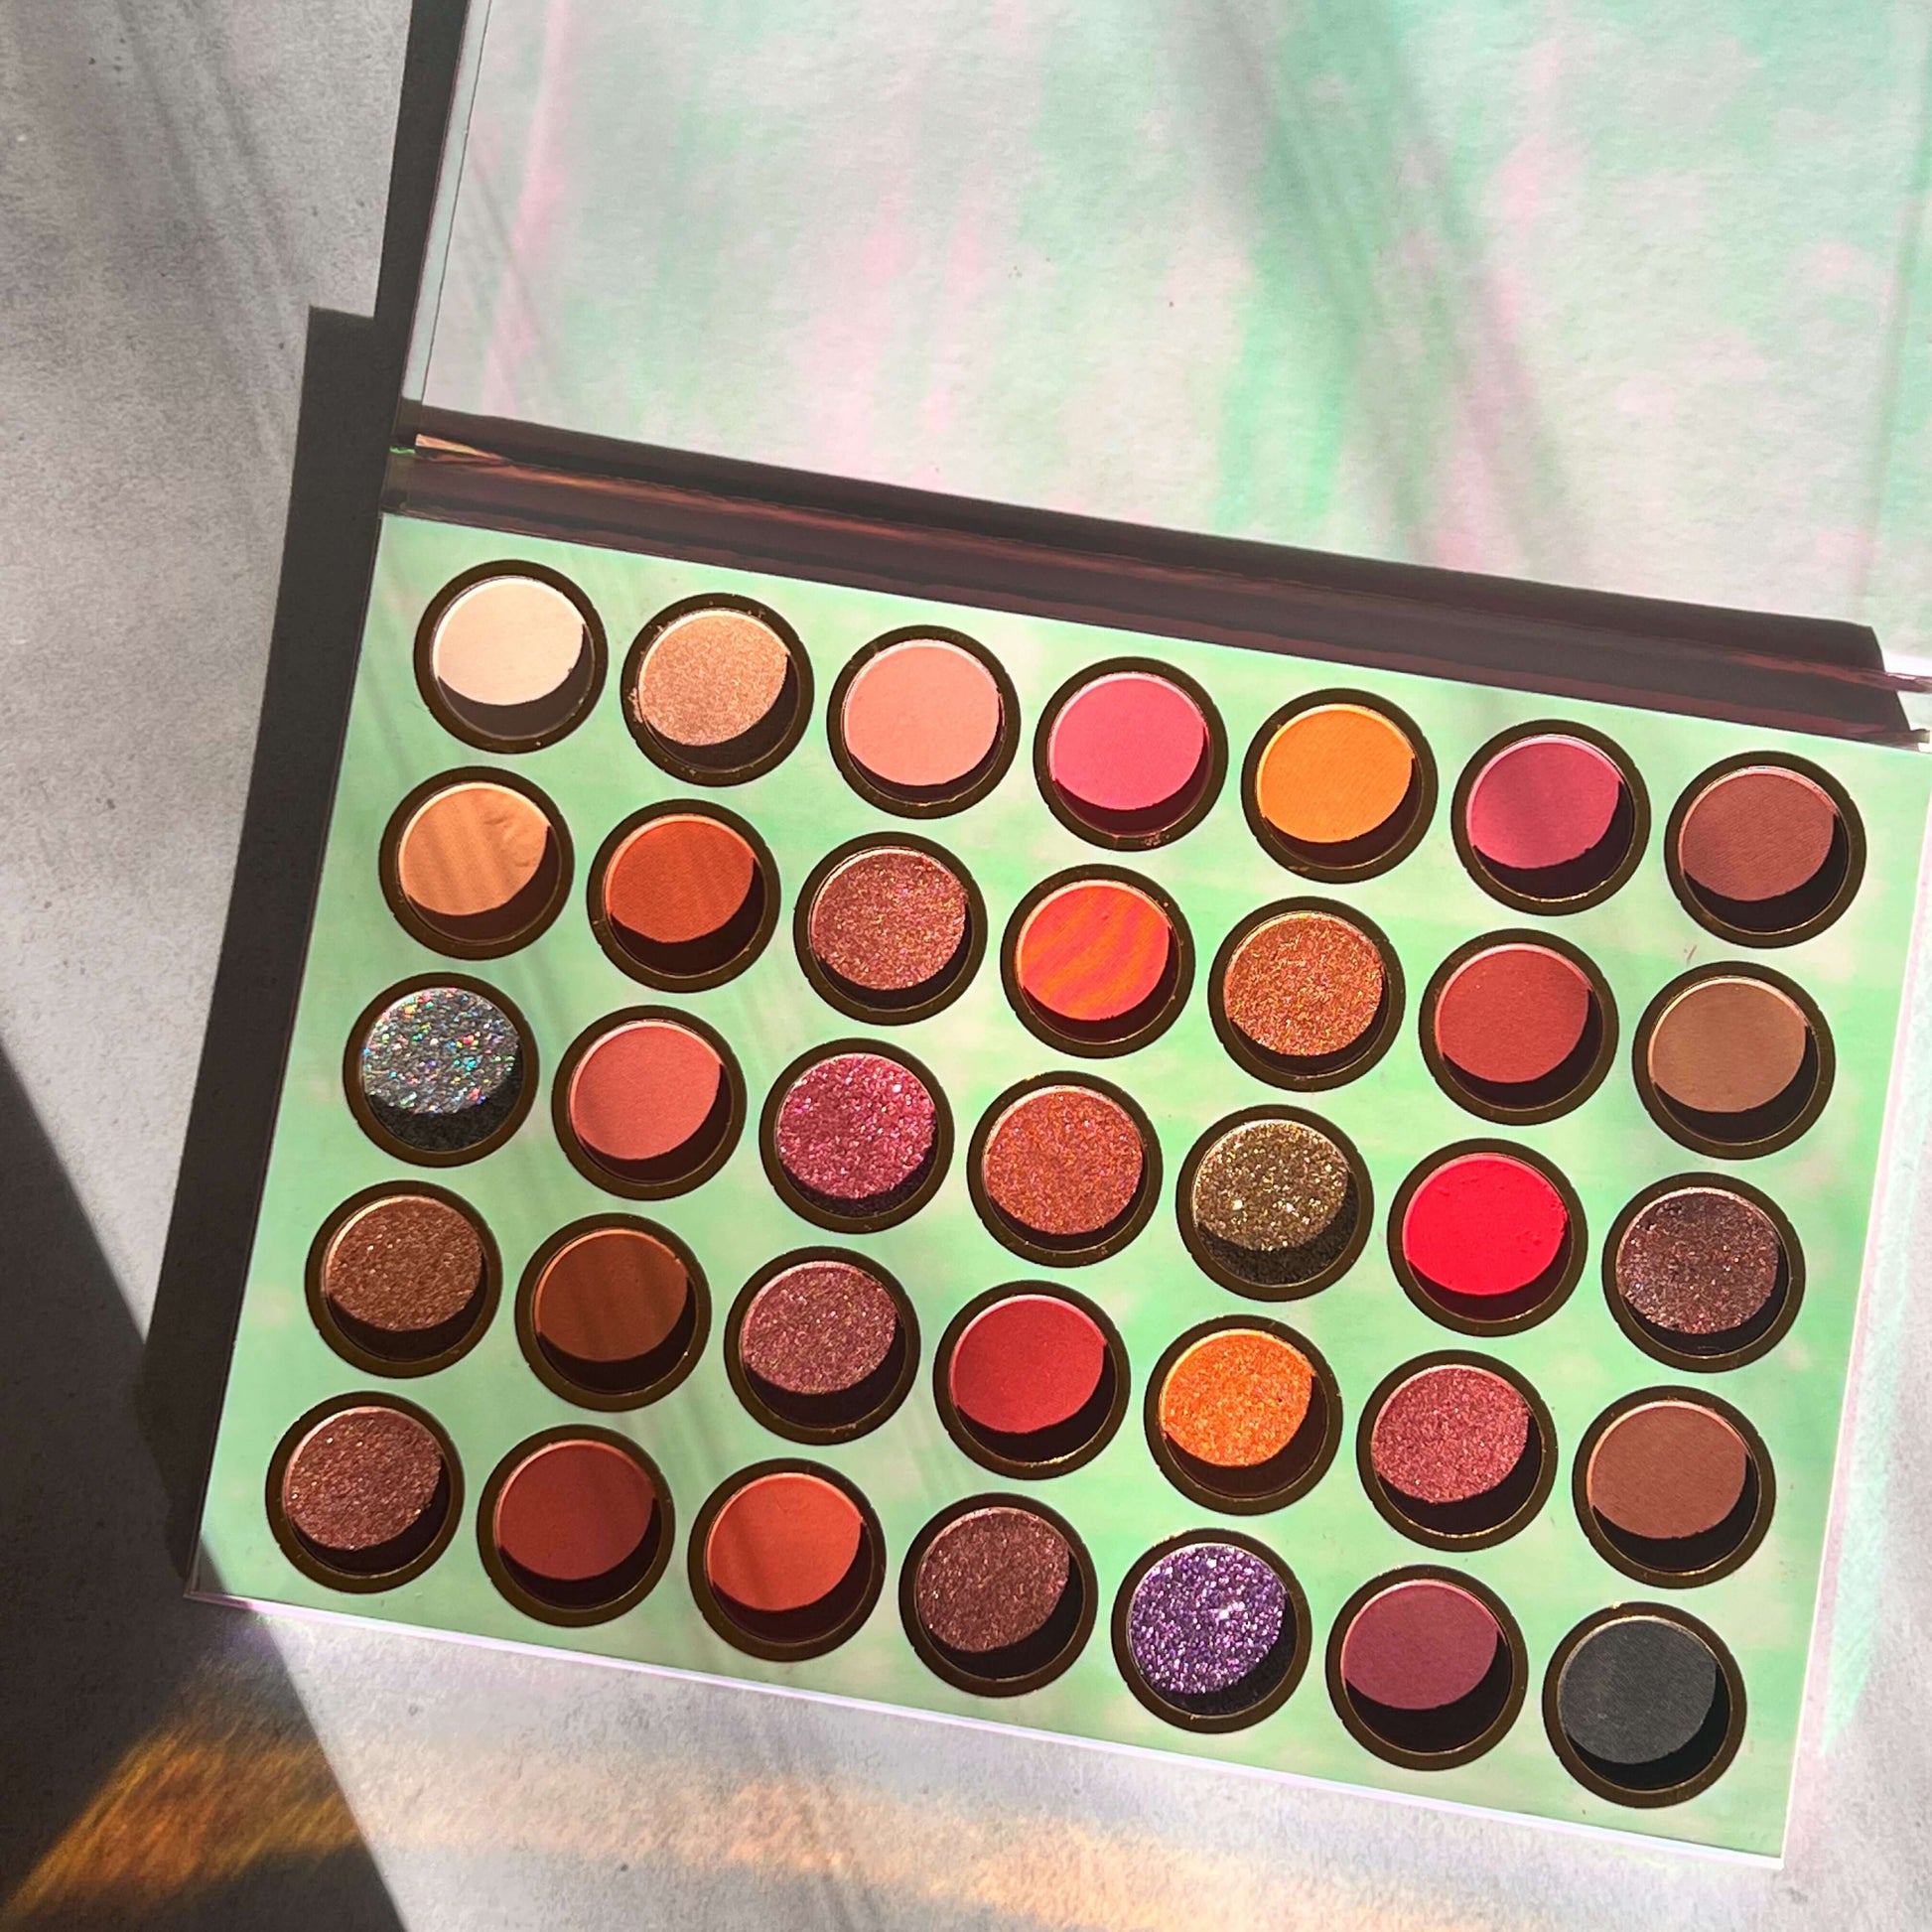 In the inside of the eye palette you can see 35 colors. they are each in a round shape.